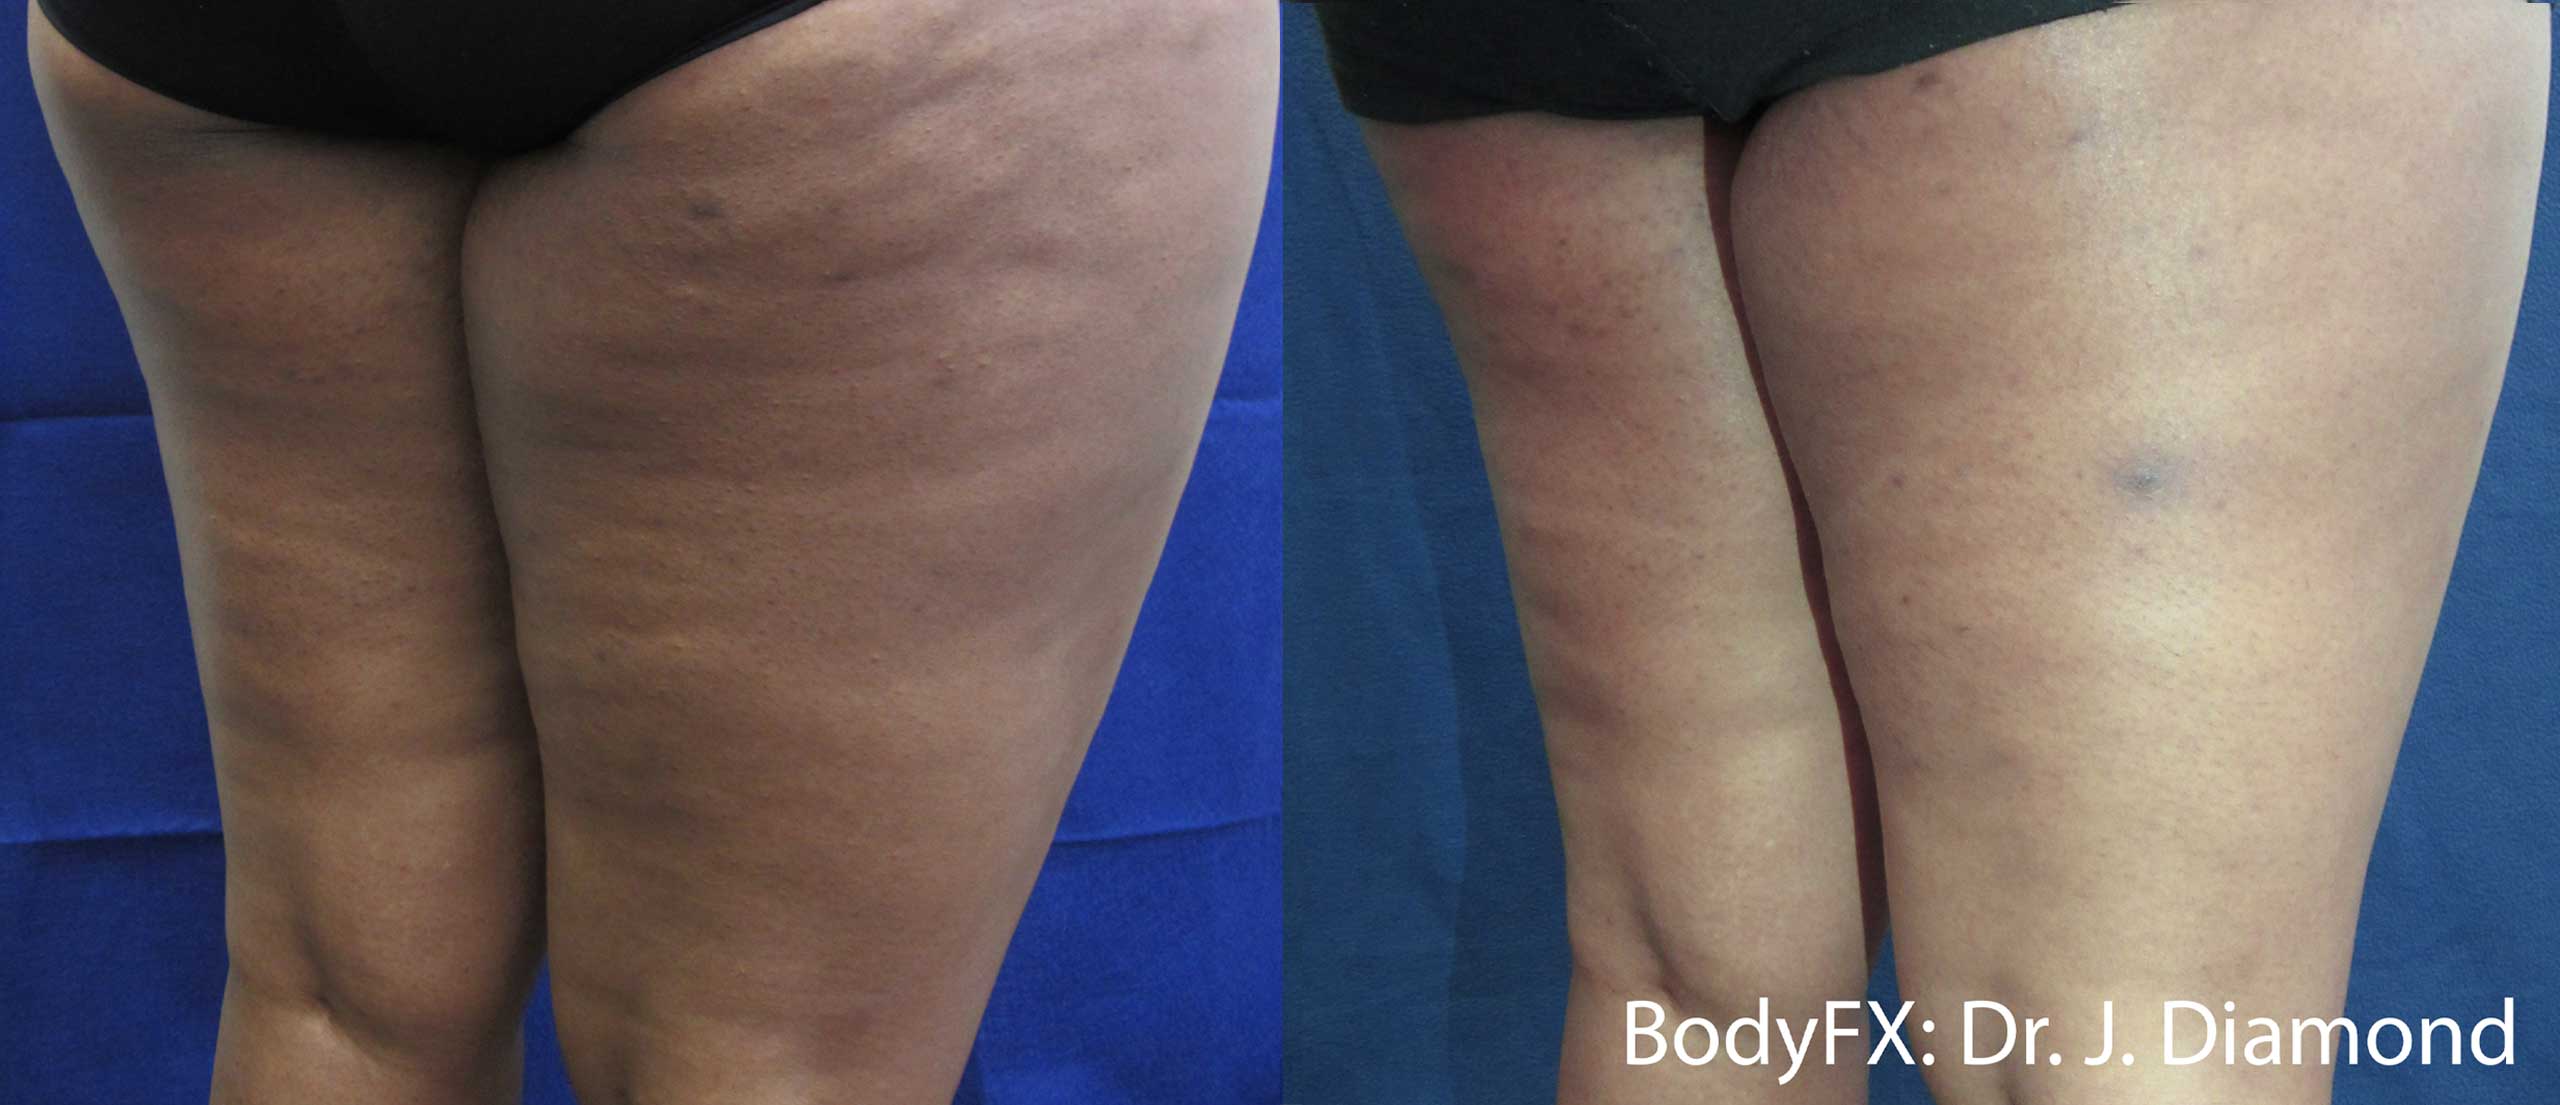 easy and painless cellulite treatment for older women